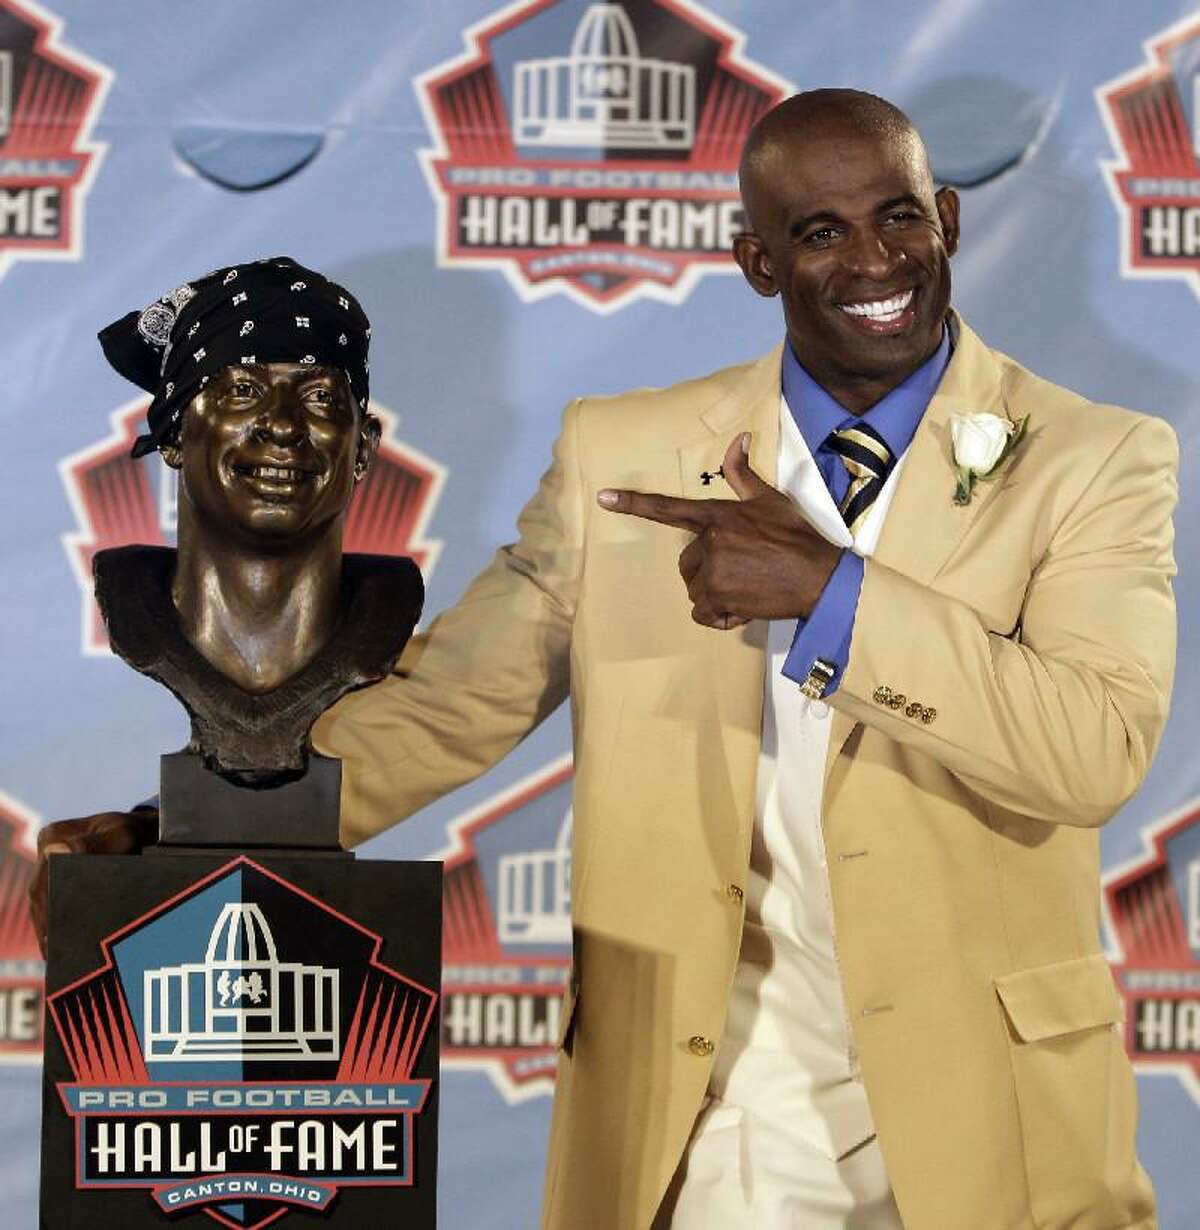 Deion Sanders puts his stamp on Hall of Fame induction